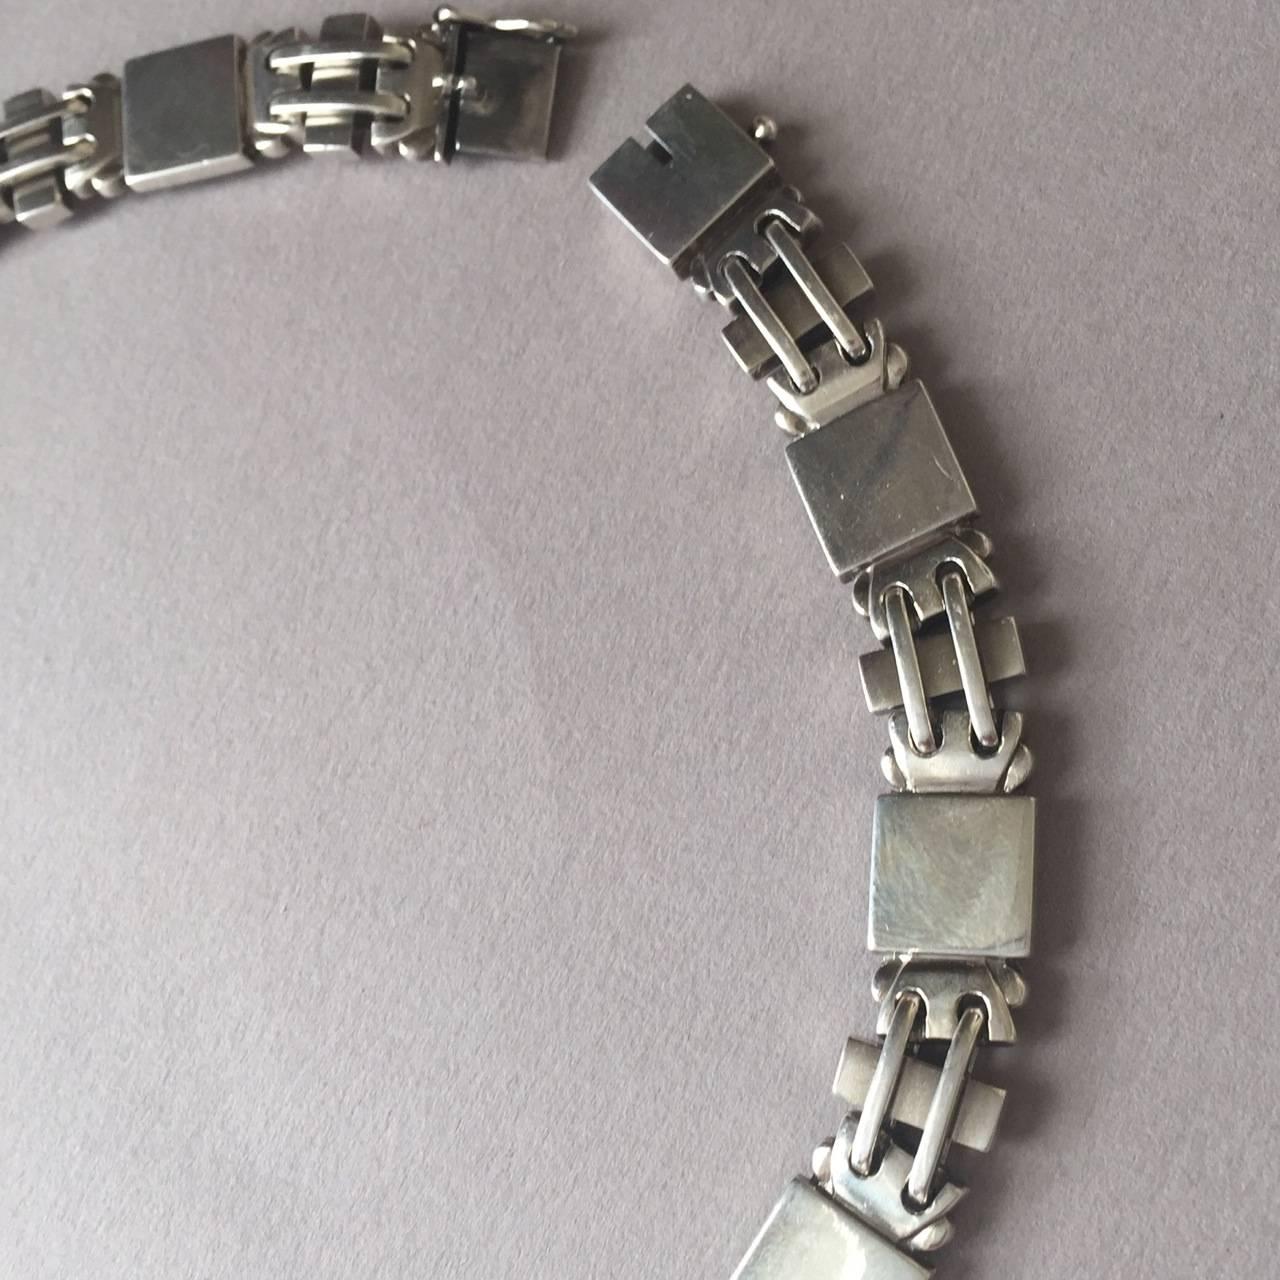 Georg Jensen Sterling Silver Art Deco Necklace No. 99 by Oscar Gundlach-Pedersen.  

Intricately detailed bracelet that is hard to find. Excellent condition with gorgeous patina.

We have the matching bracelet in stock.

Dimensons: 15.5